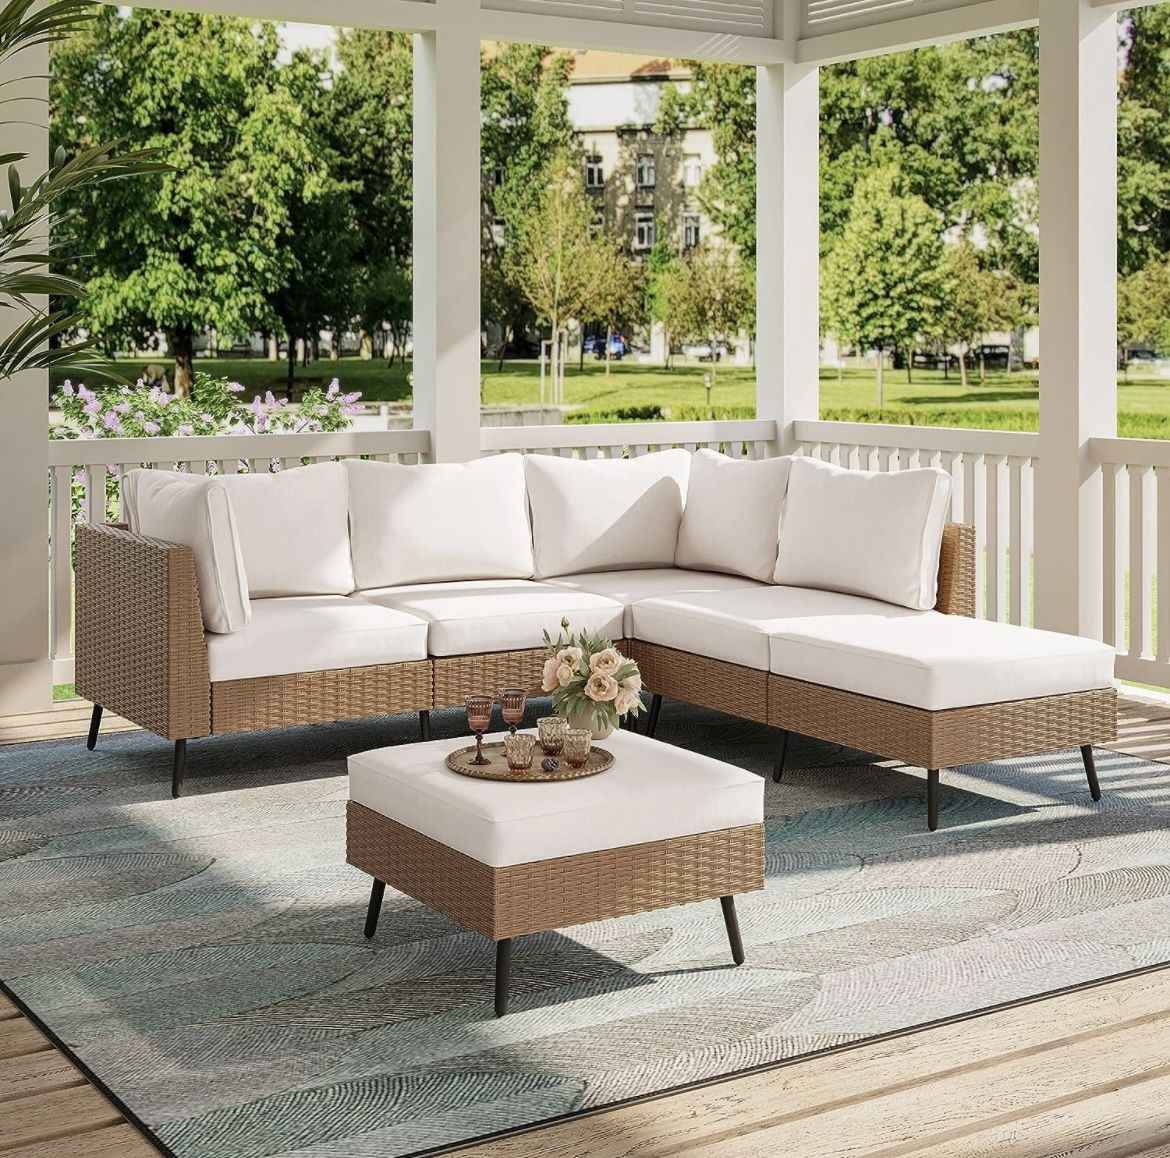 The Beauty of a Wicker Patio Set: Perfecting Your Outdoor Space